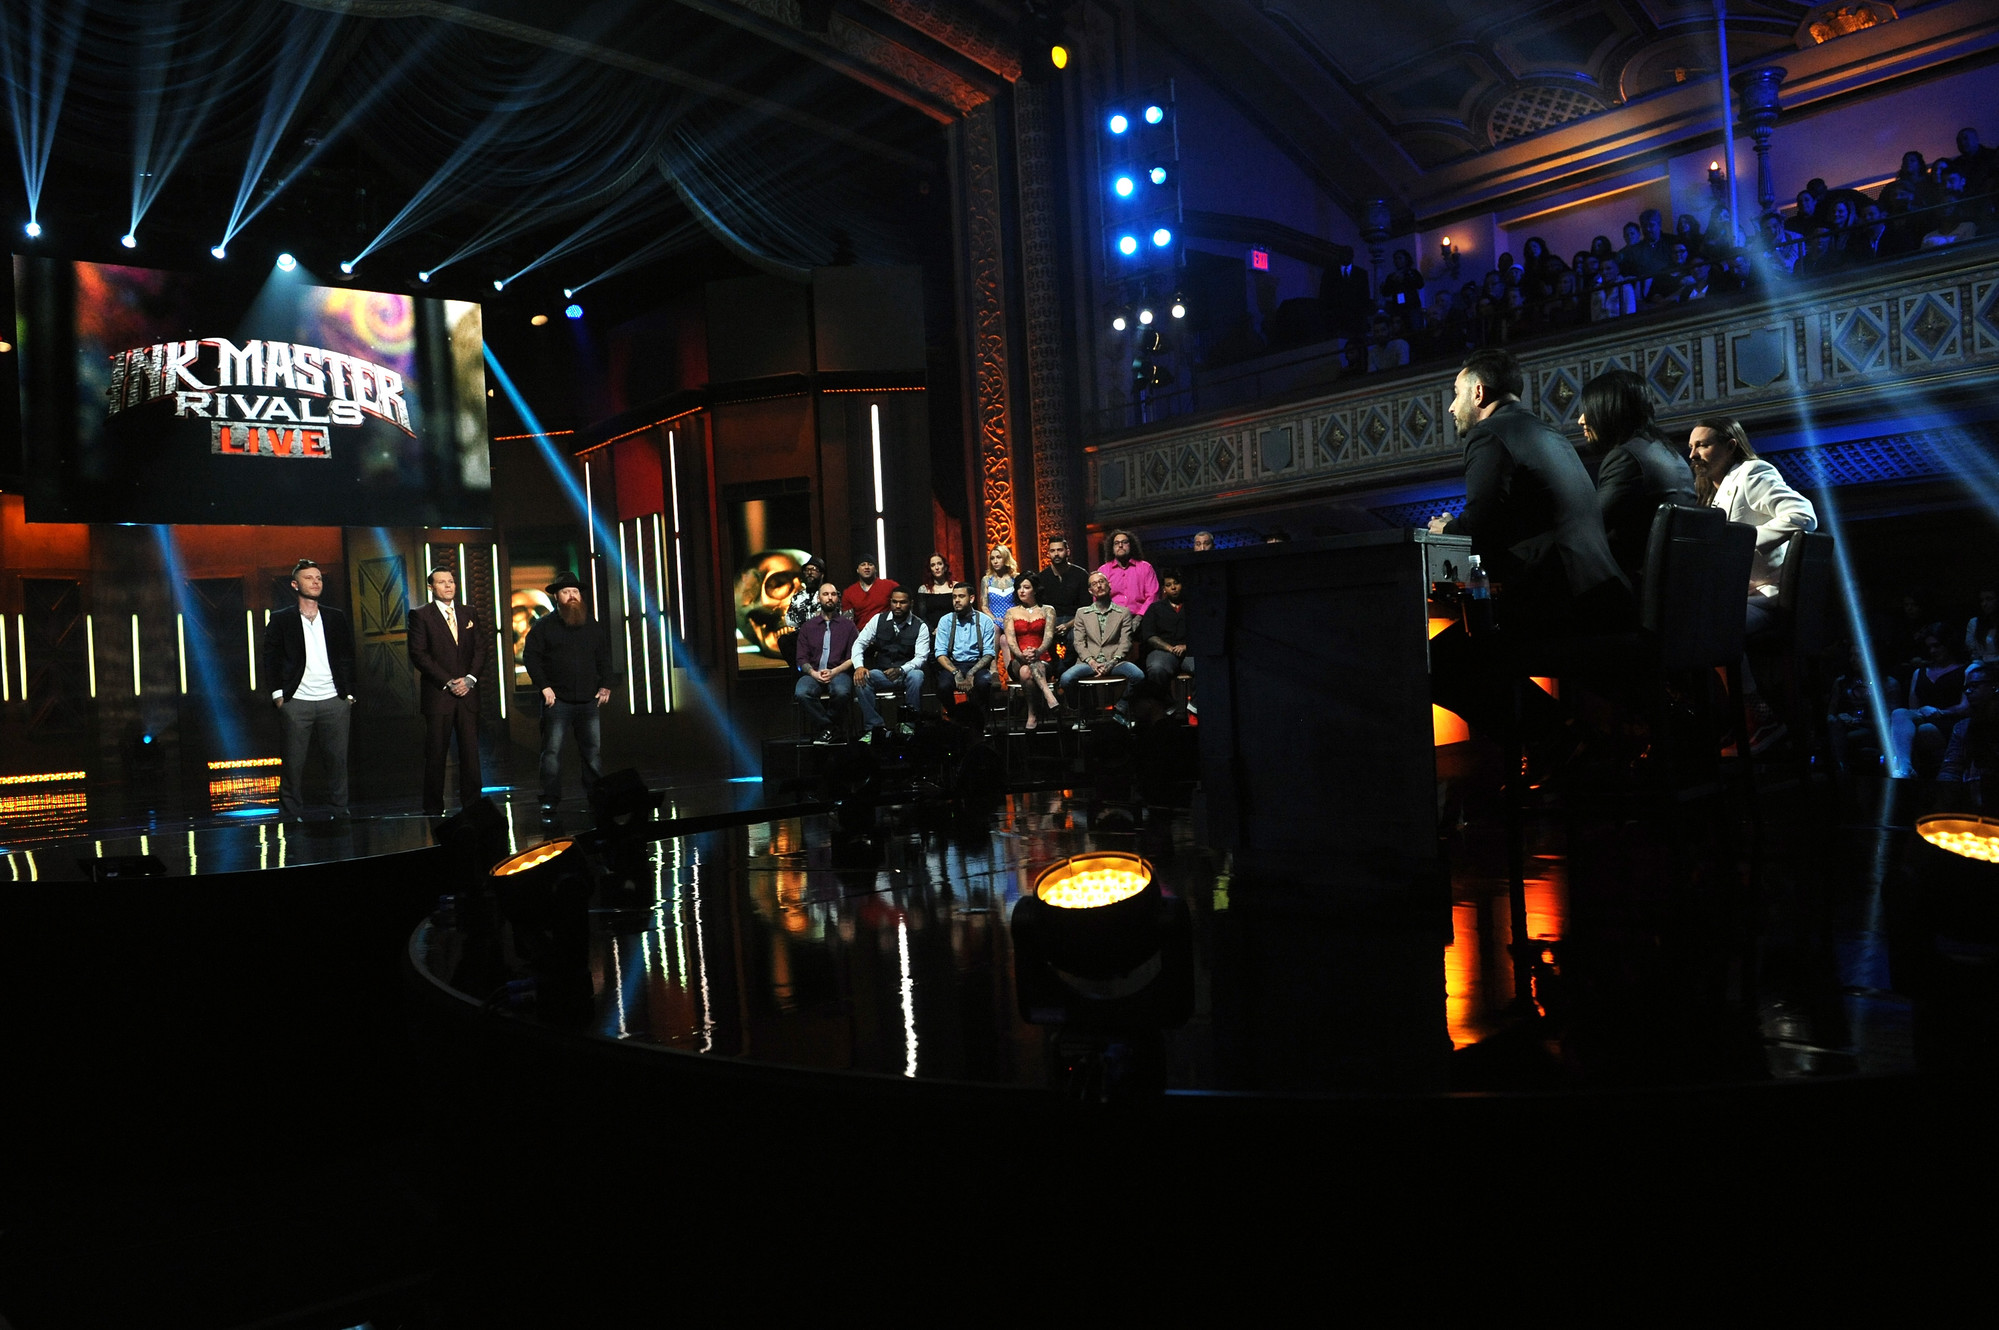 The finalists reacted onstage to host Dave Navarro and judges Chris Nunez and Oliver Peck’s comments about their tattoos at the live finale, held in the Manhattan Center Grand Ballroom on Dec. 16